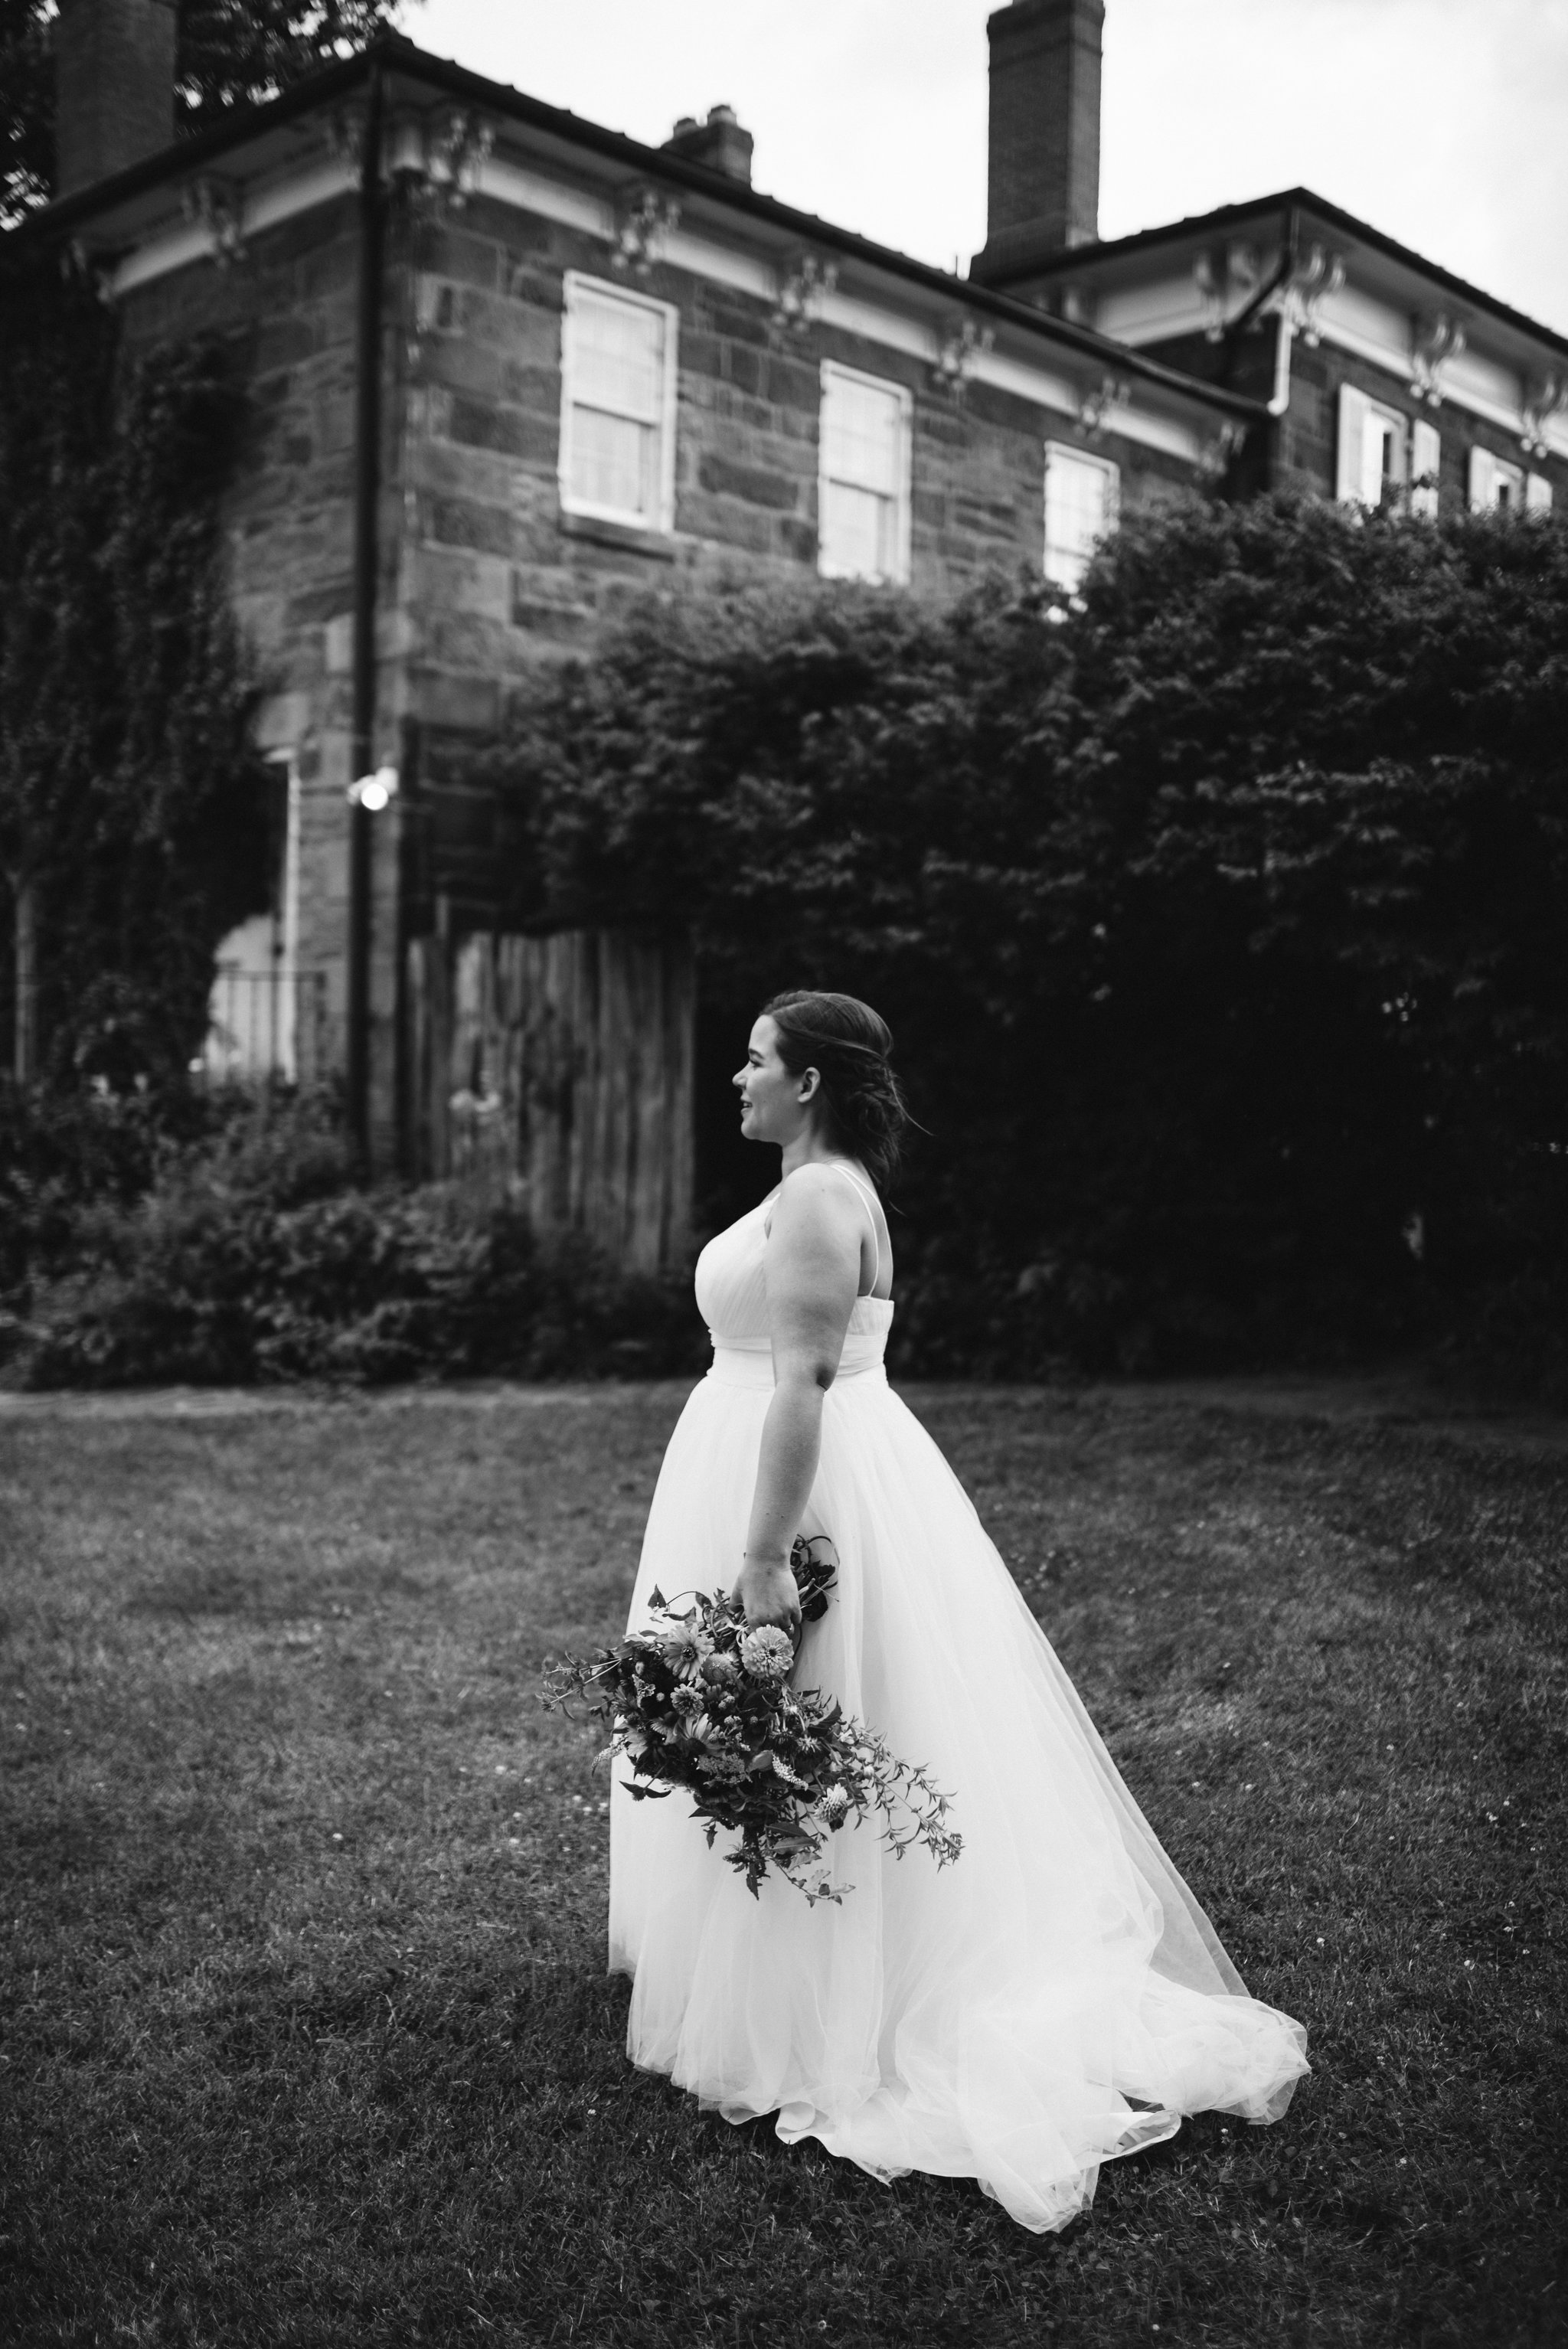 Rocklands Farm, Maryland, Intimate Wedding, Baltimore Wedding Photographer, Sungold Flower Co, Rustic, Romantic, Barn Wedding, Bride Walking Across Lawn Holding Flowers, Black and White Photo